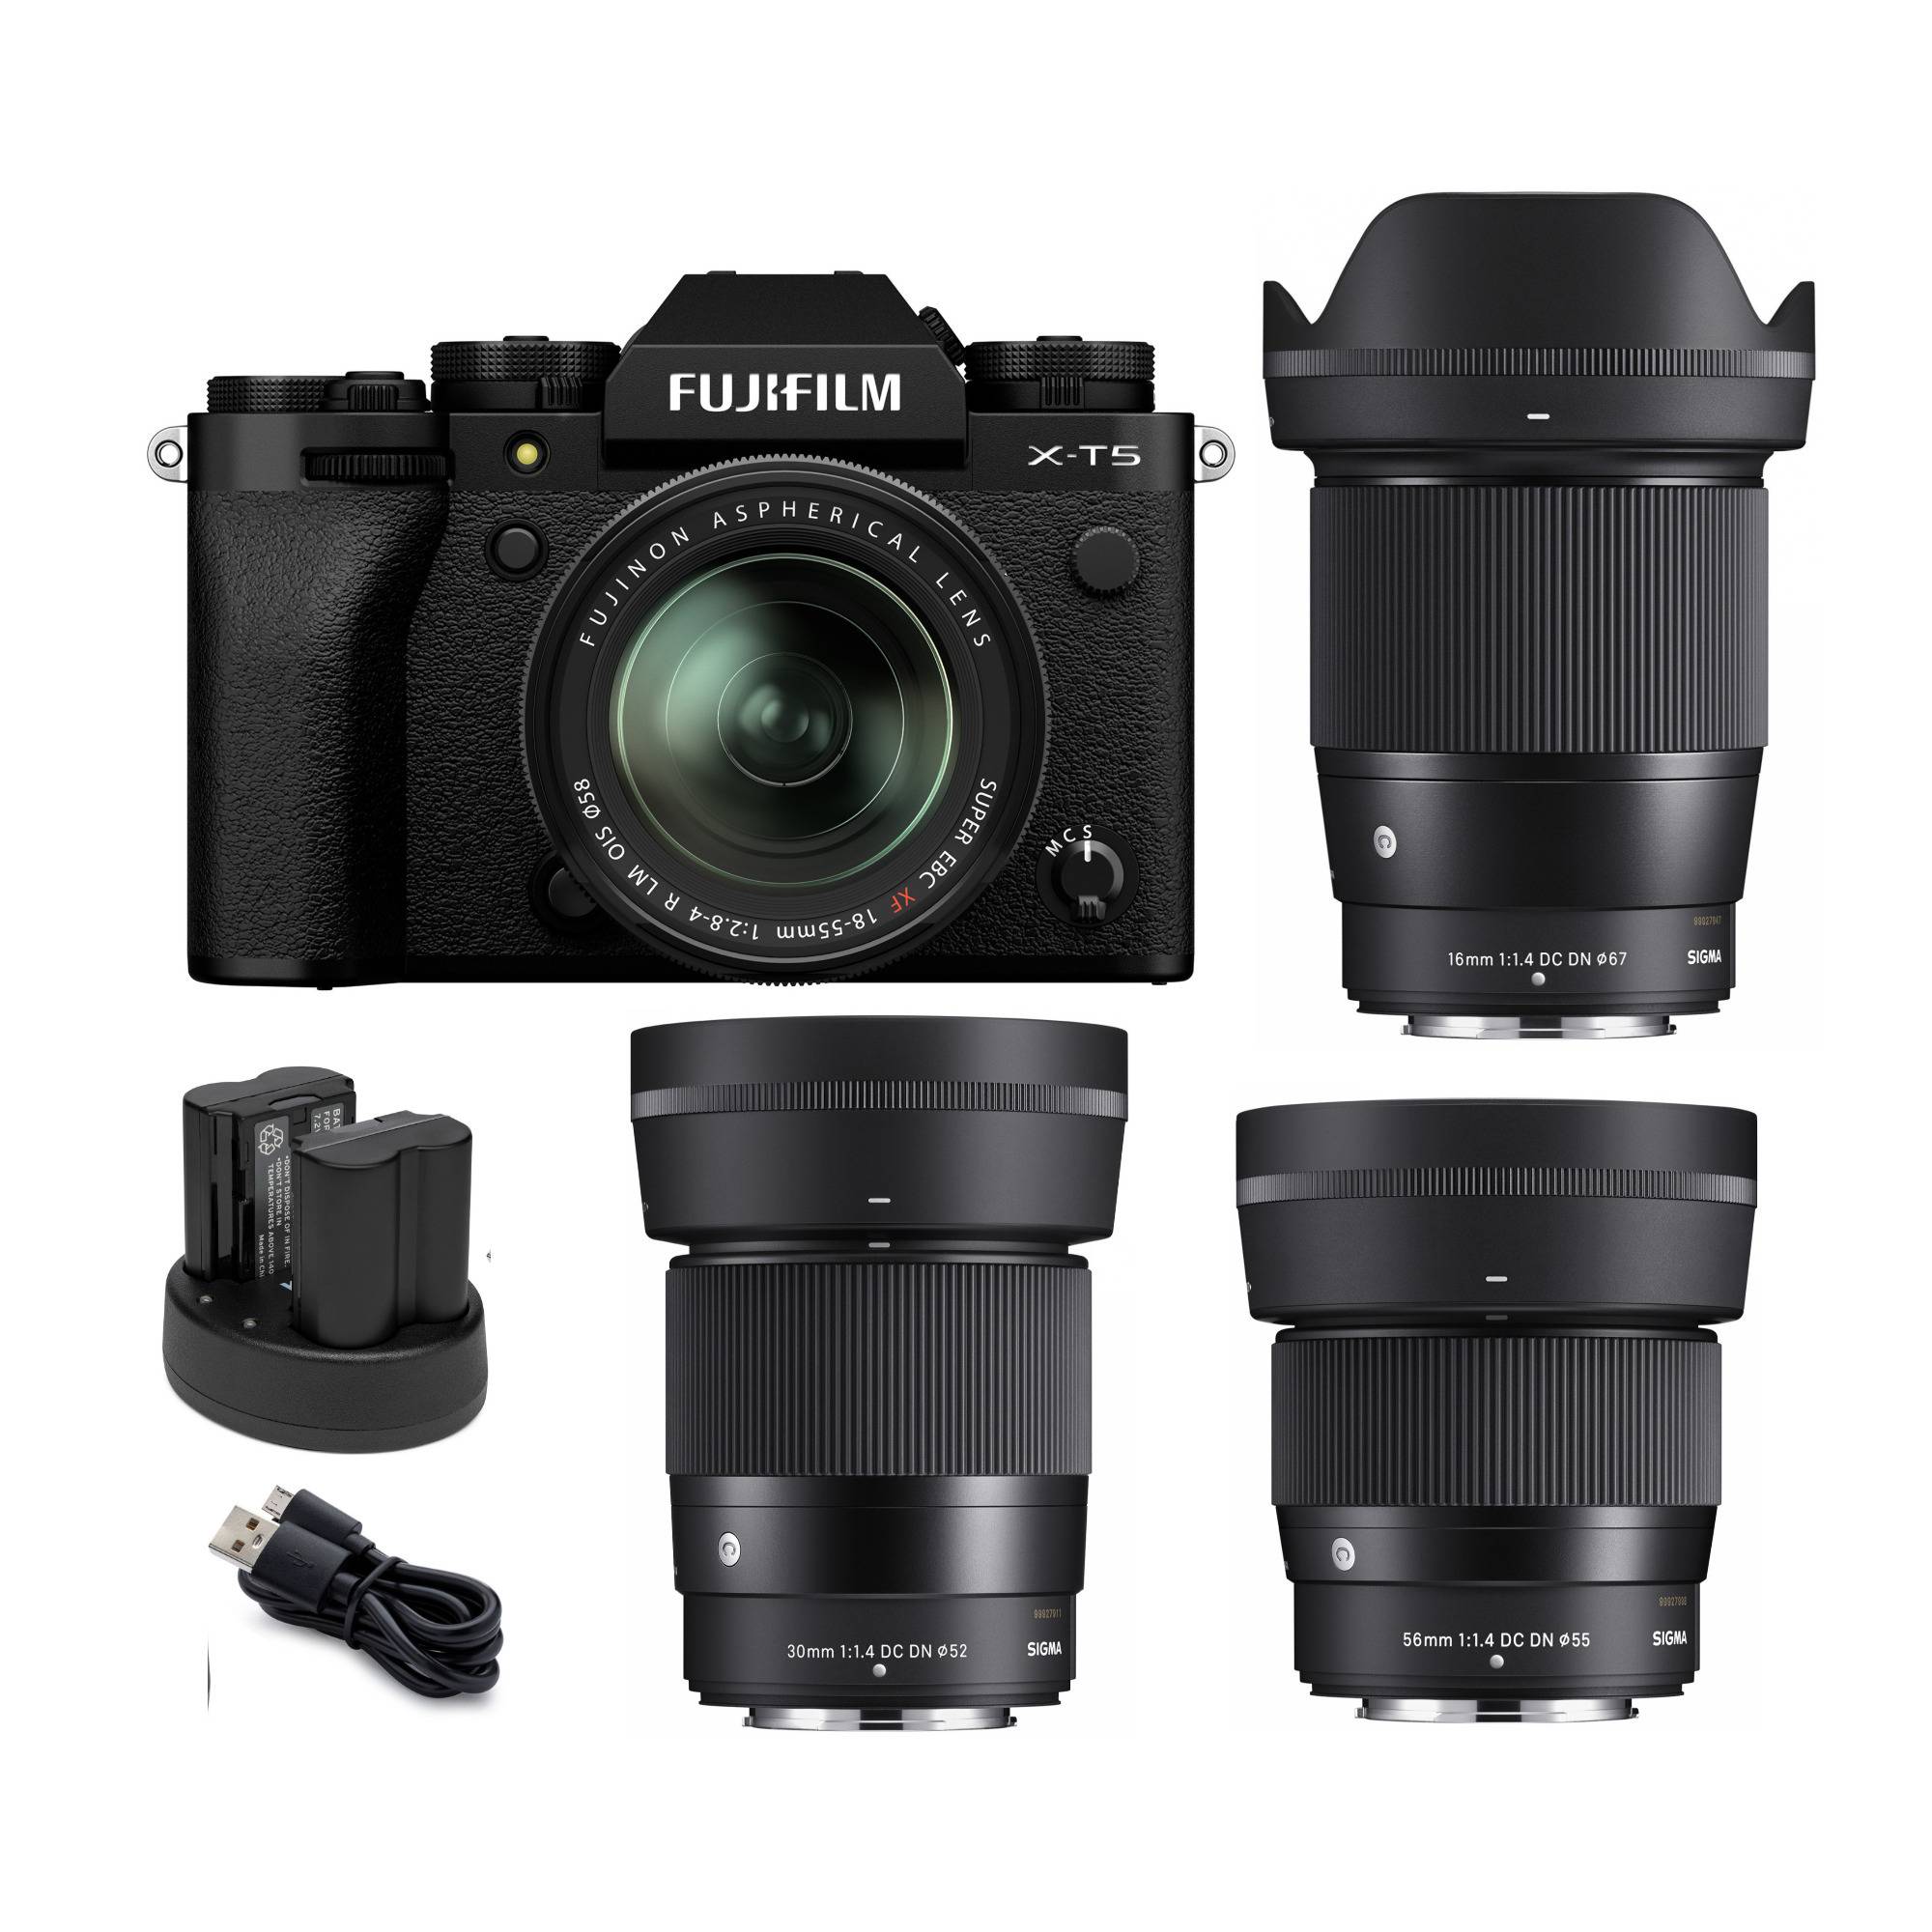 Fujifilm X-T5 Mirrorless Camera Body with XF18-55 (Black) & 56mm, 30mm and 16mm Lens